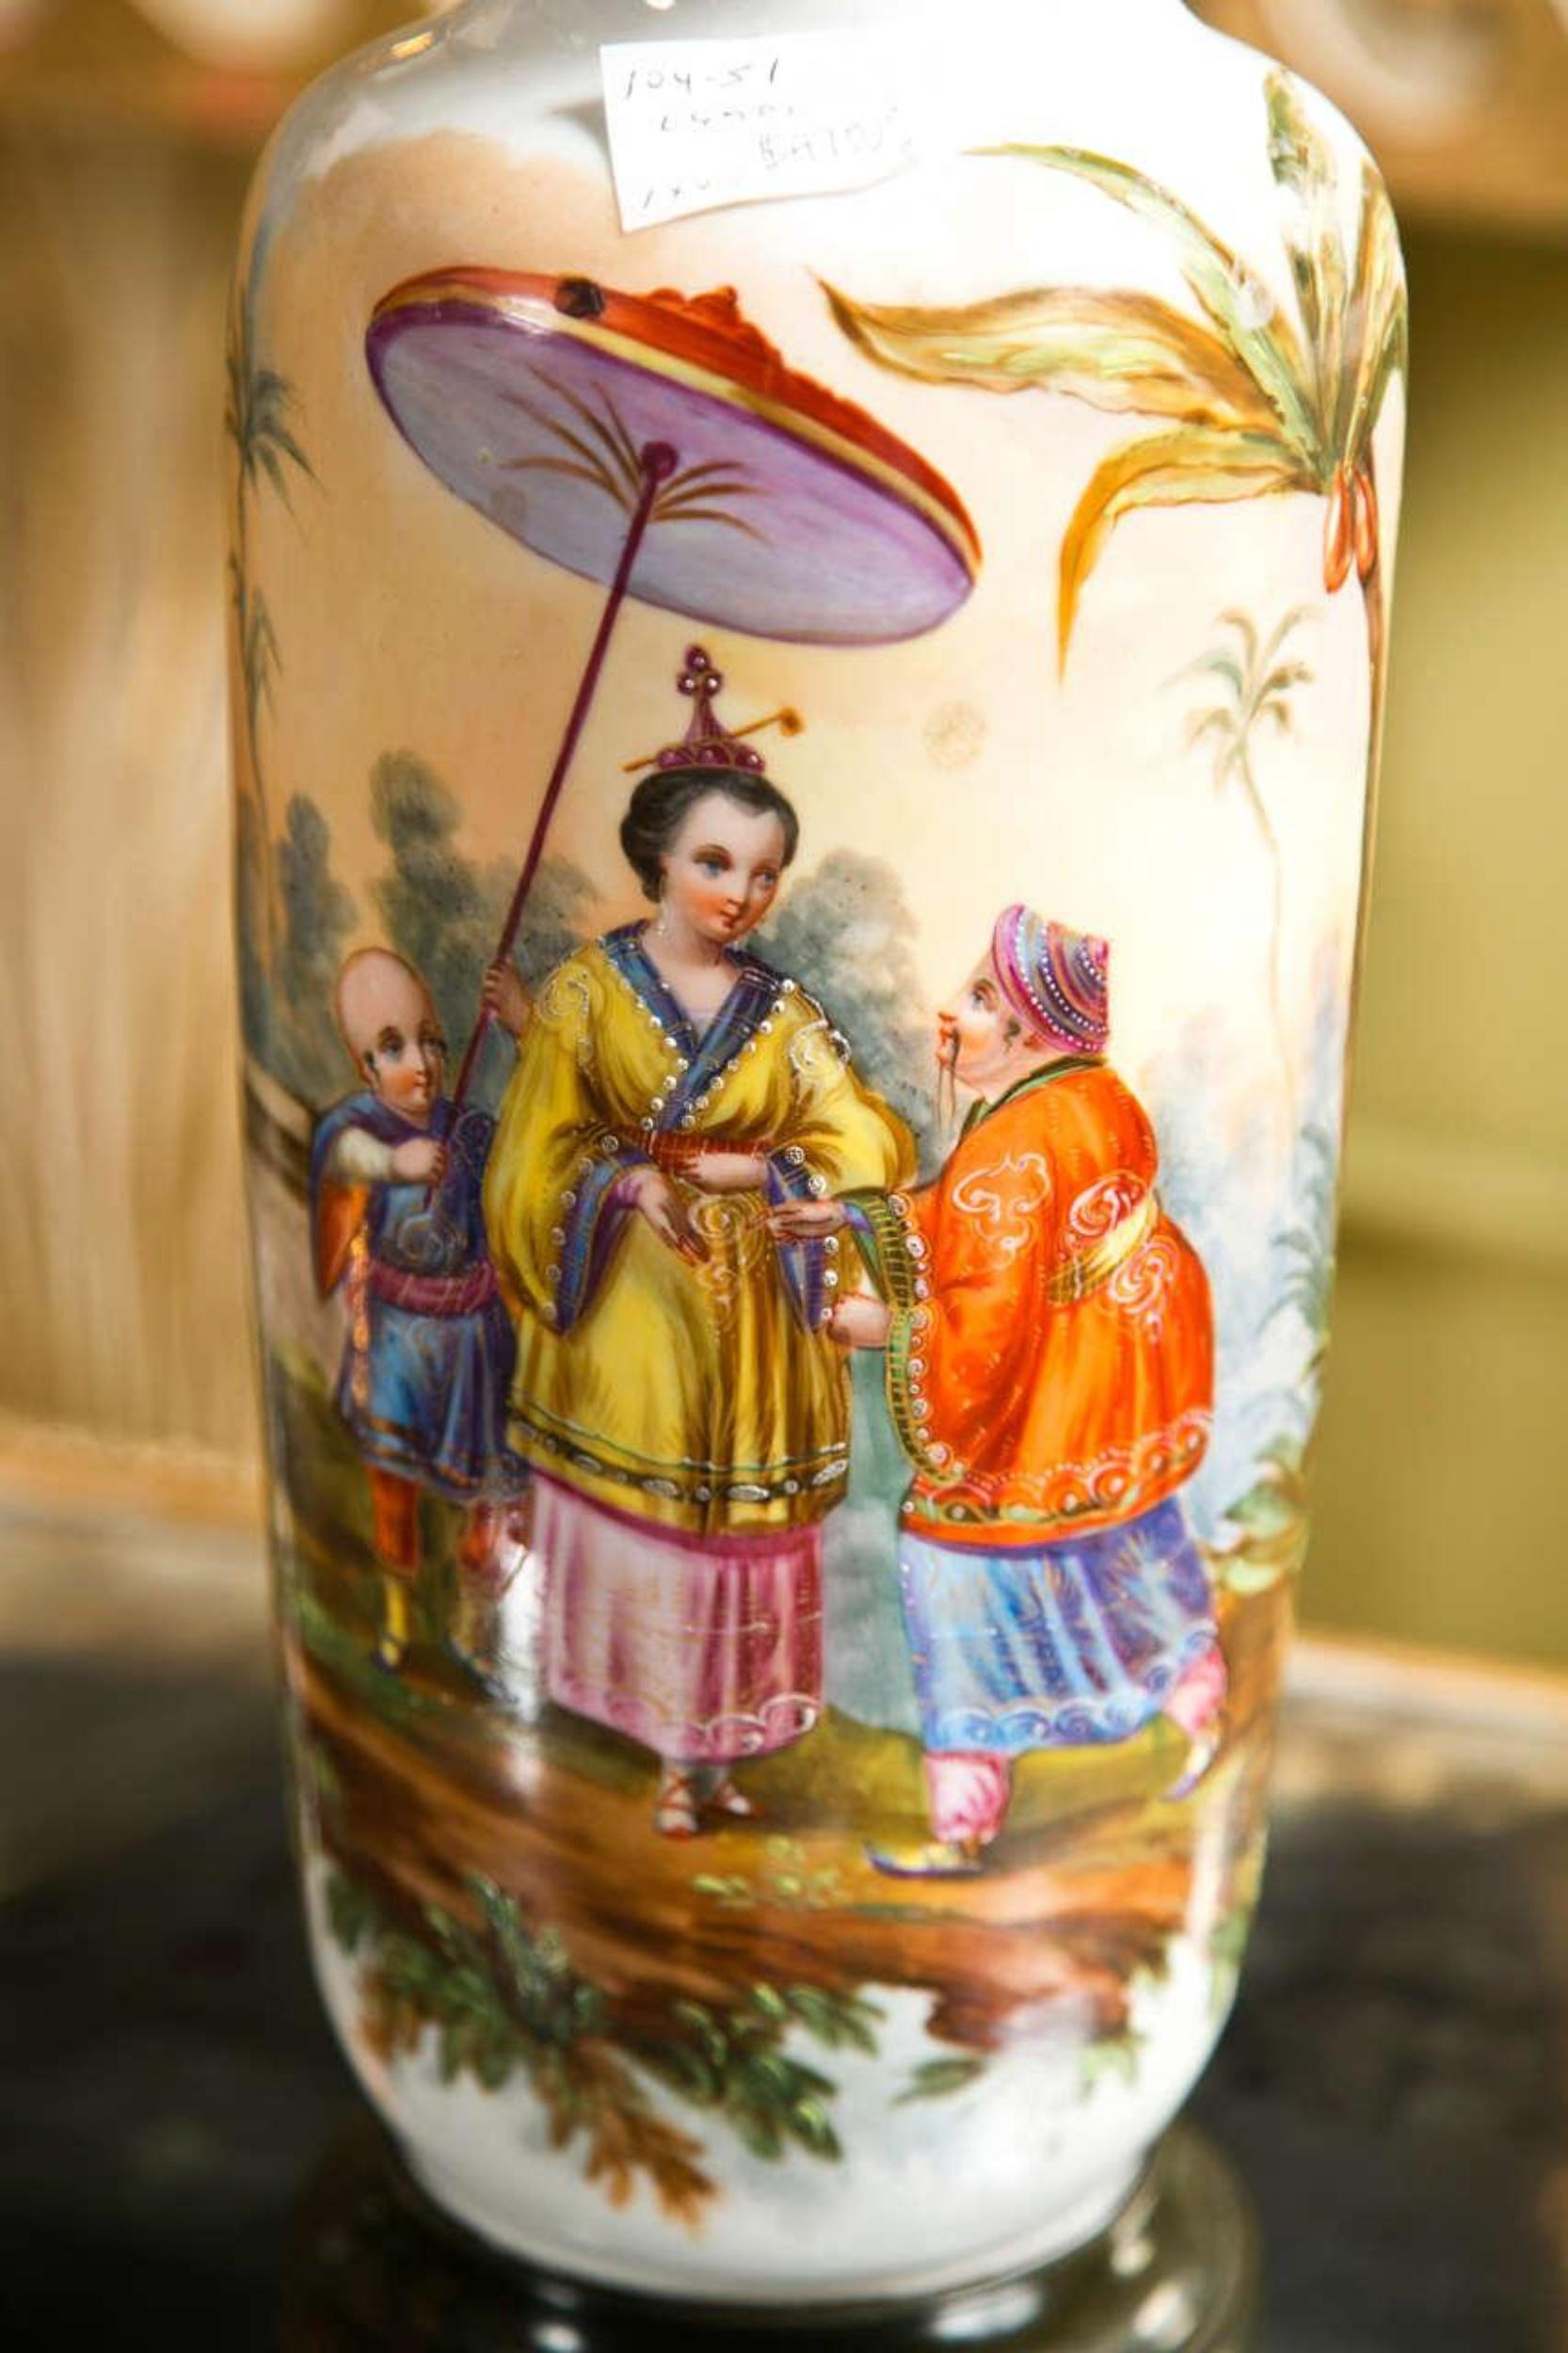 Pair of 19th century French Chinoiserie style porcelain lamps, hand-painted, jewel like, Chinoiserie scene of figures. Wonderfully decorated. The whole supported on a round wooden base. Shades measurement: 11 inches diameter. Shades not included.